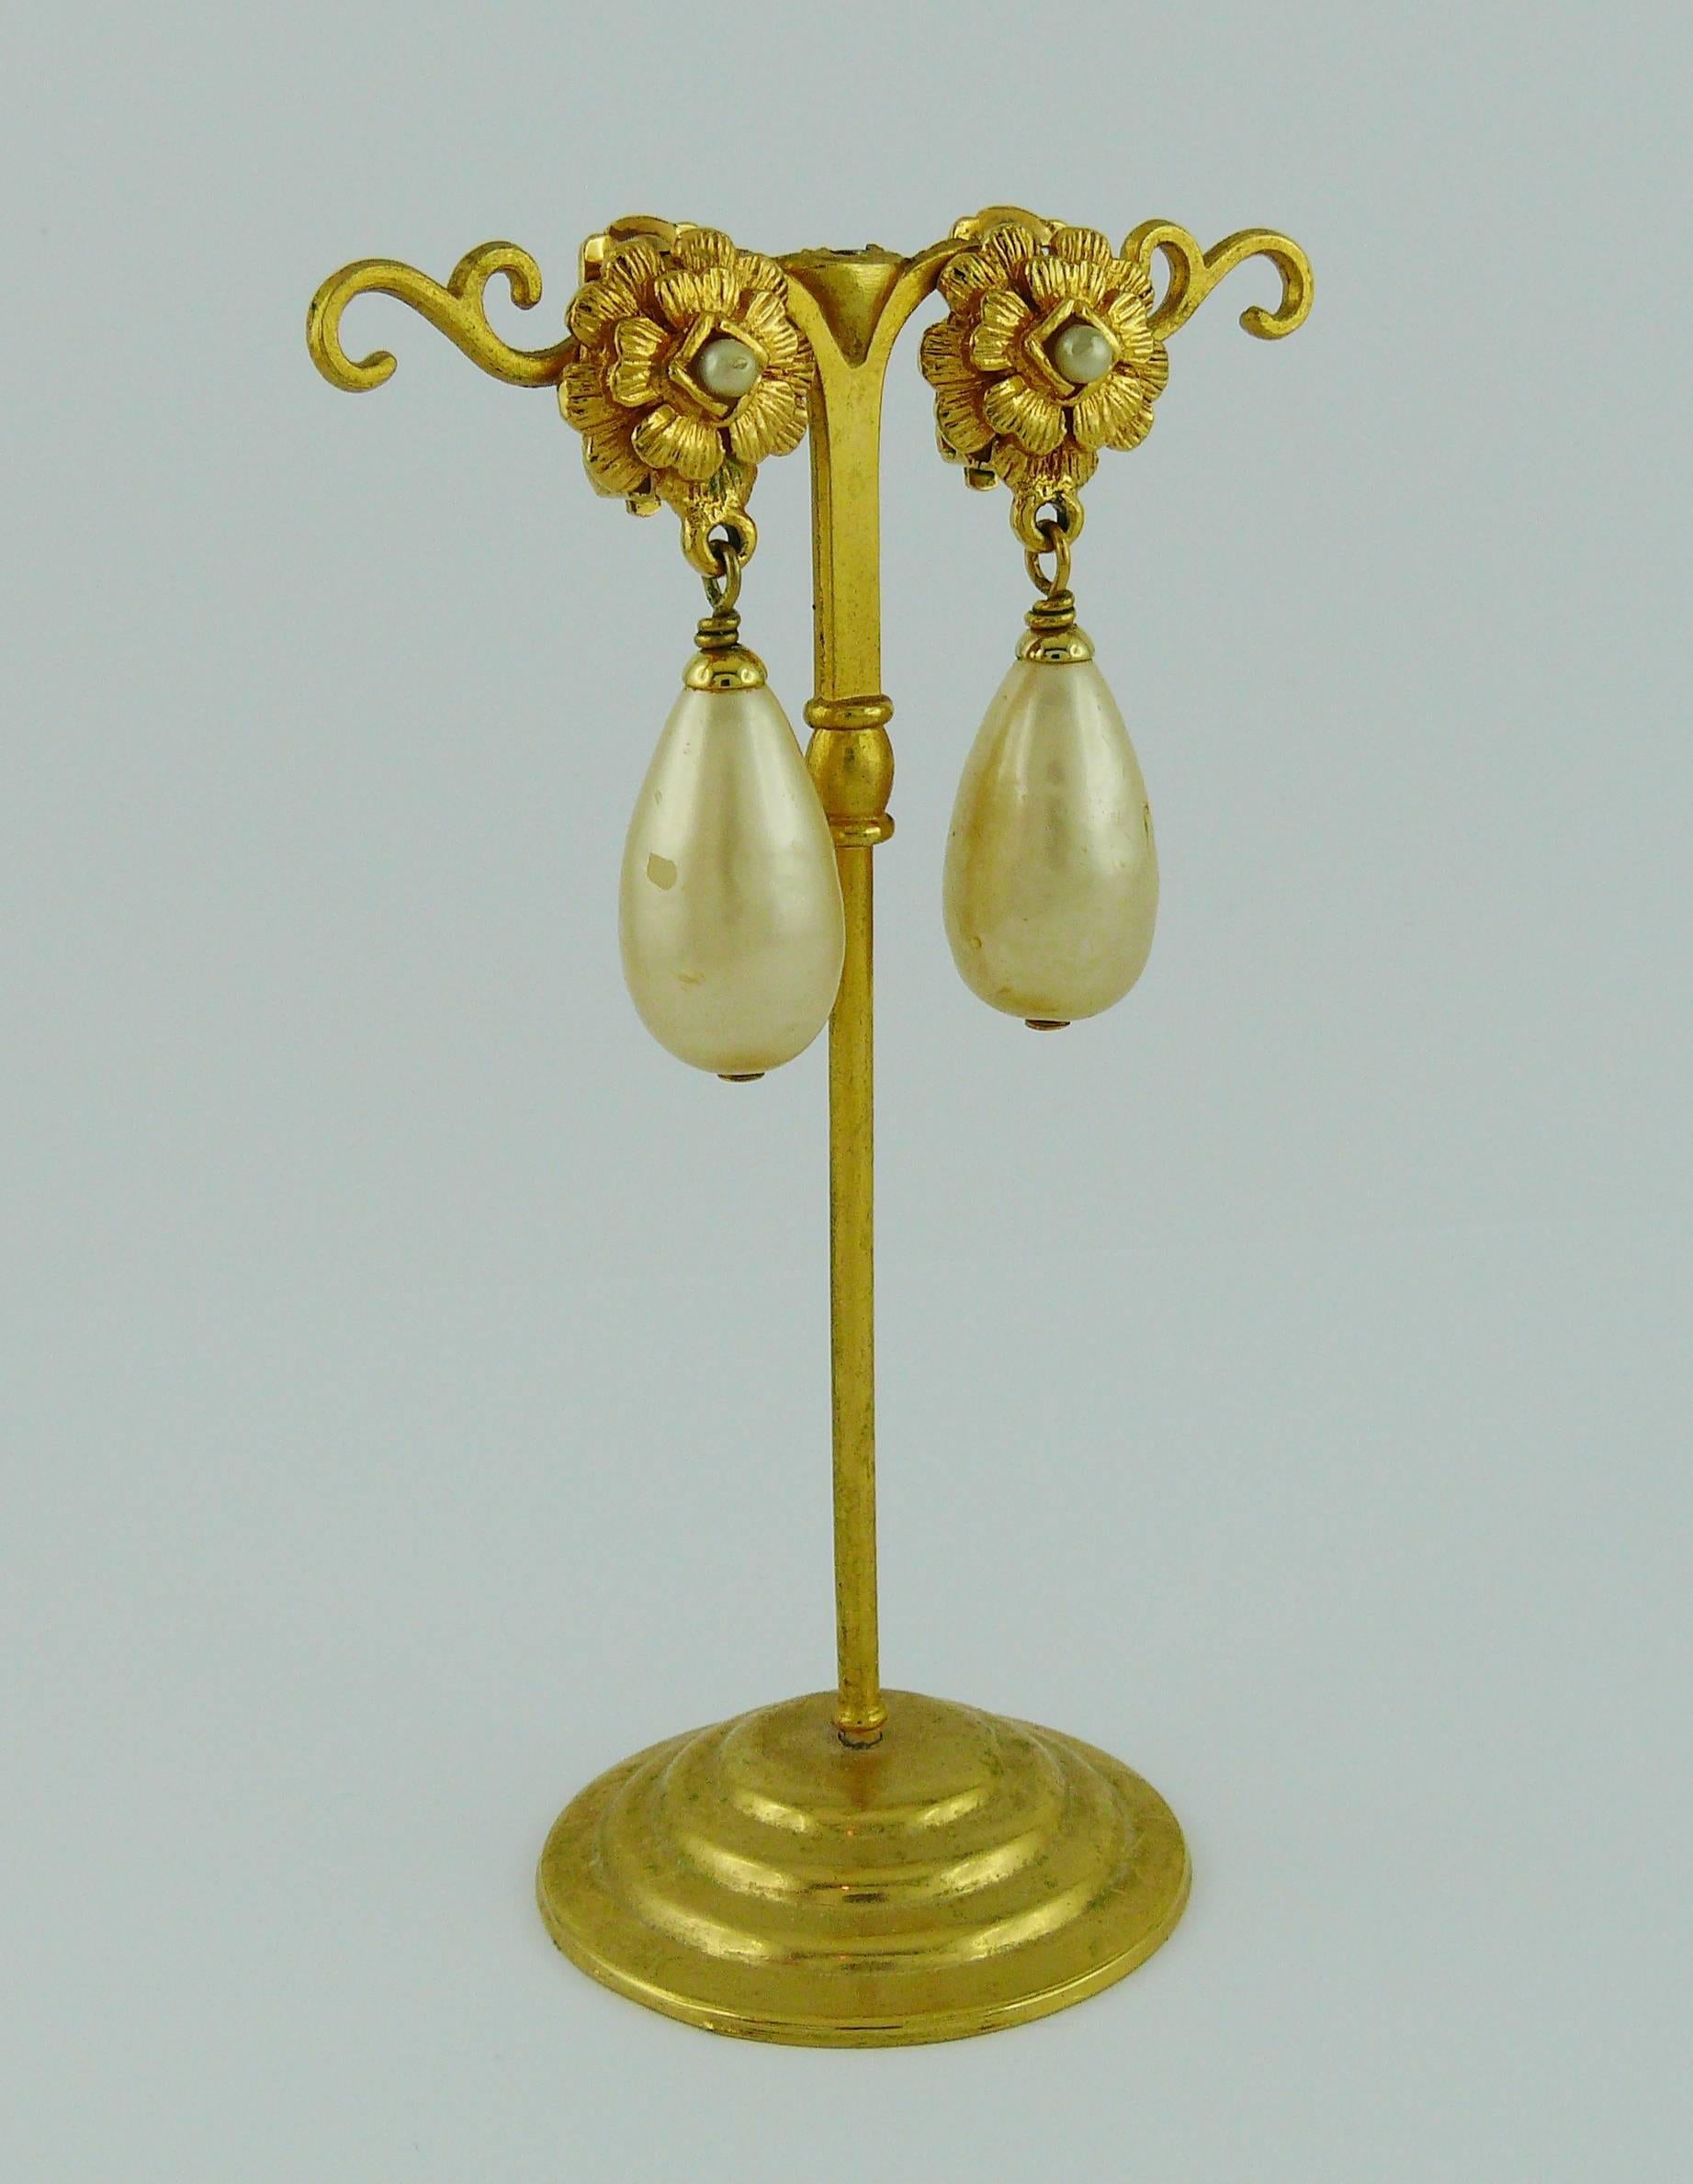 CHANEL vintage classic clip-on earrings featuring a gold toned camellia flower with a large GRIPOIX glass faux pearl drop.

VICTOIRE DE CASTELLANE era.

Marked CHANEL 2 9 Made in France.

Indicative measurements : length approx. 4.2 cm (1.65 inches)